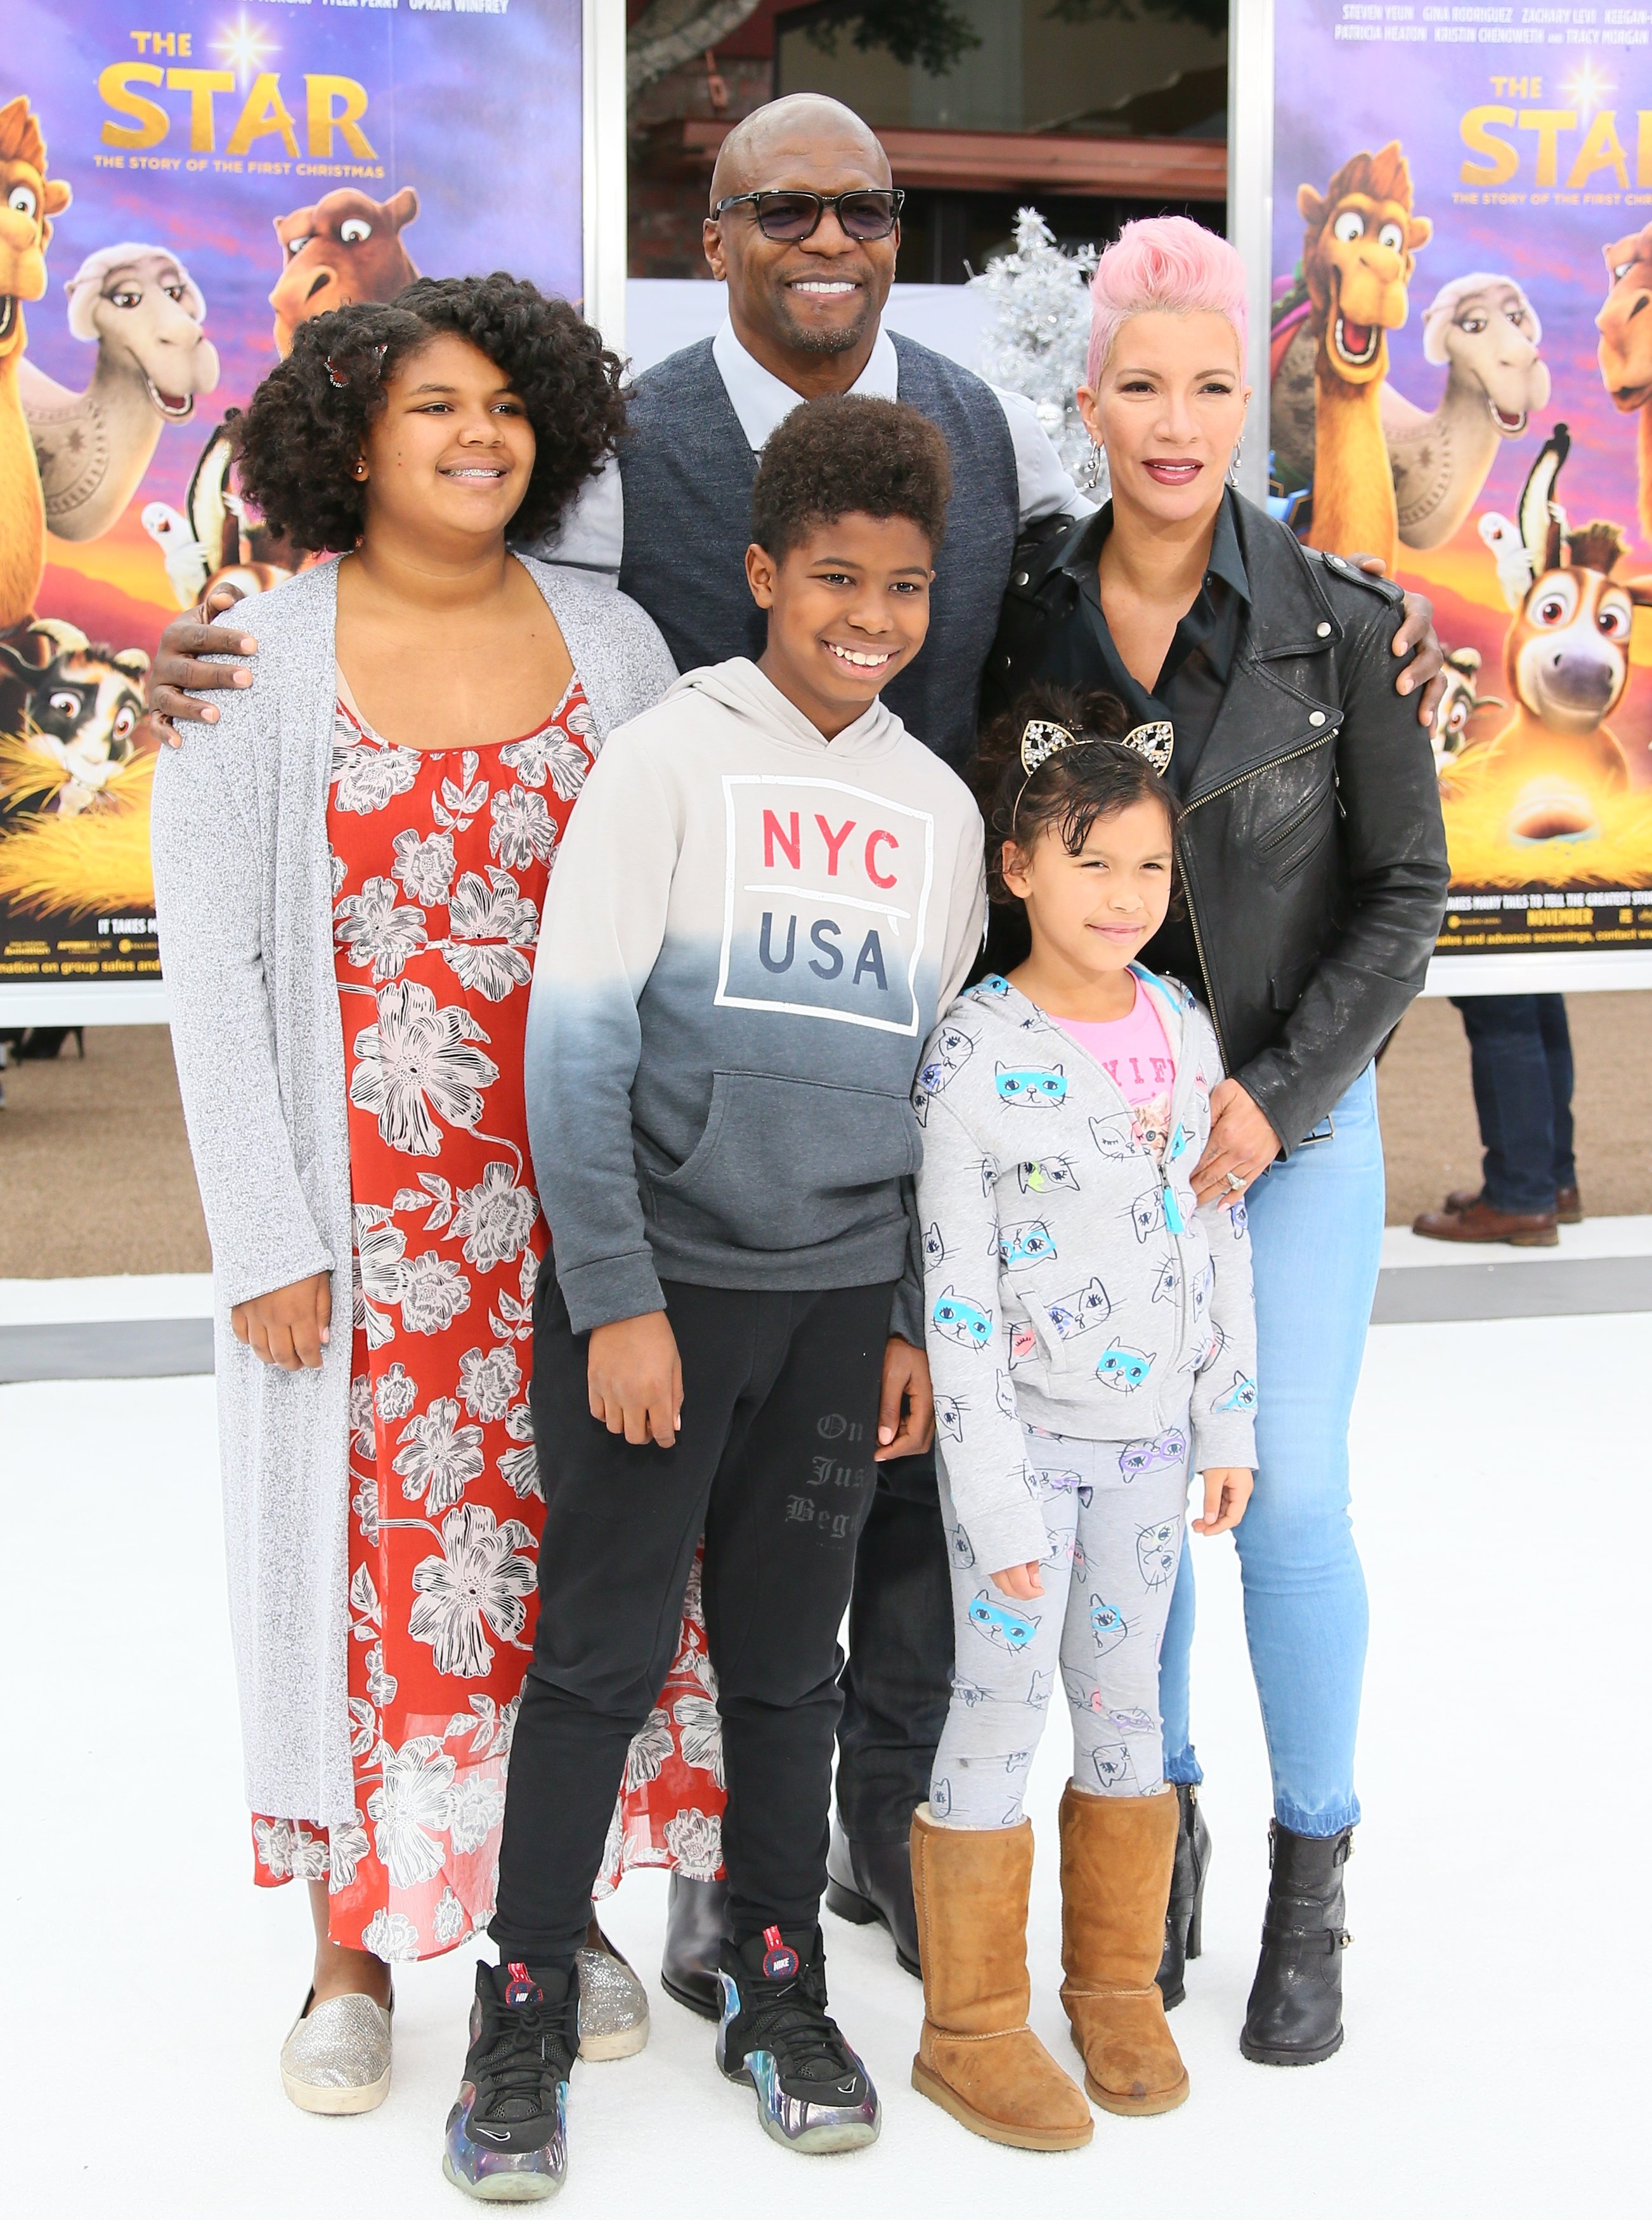 Terry Crews and his family attend the premiere of Columbia Pictures' "The Star" on November 12, 2017, in Los Angeles, California. | Sources: Getty Images